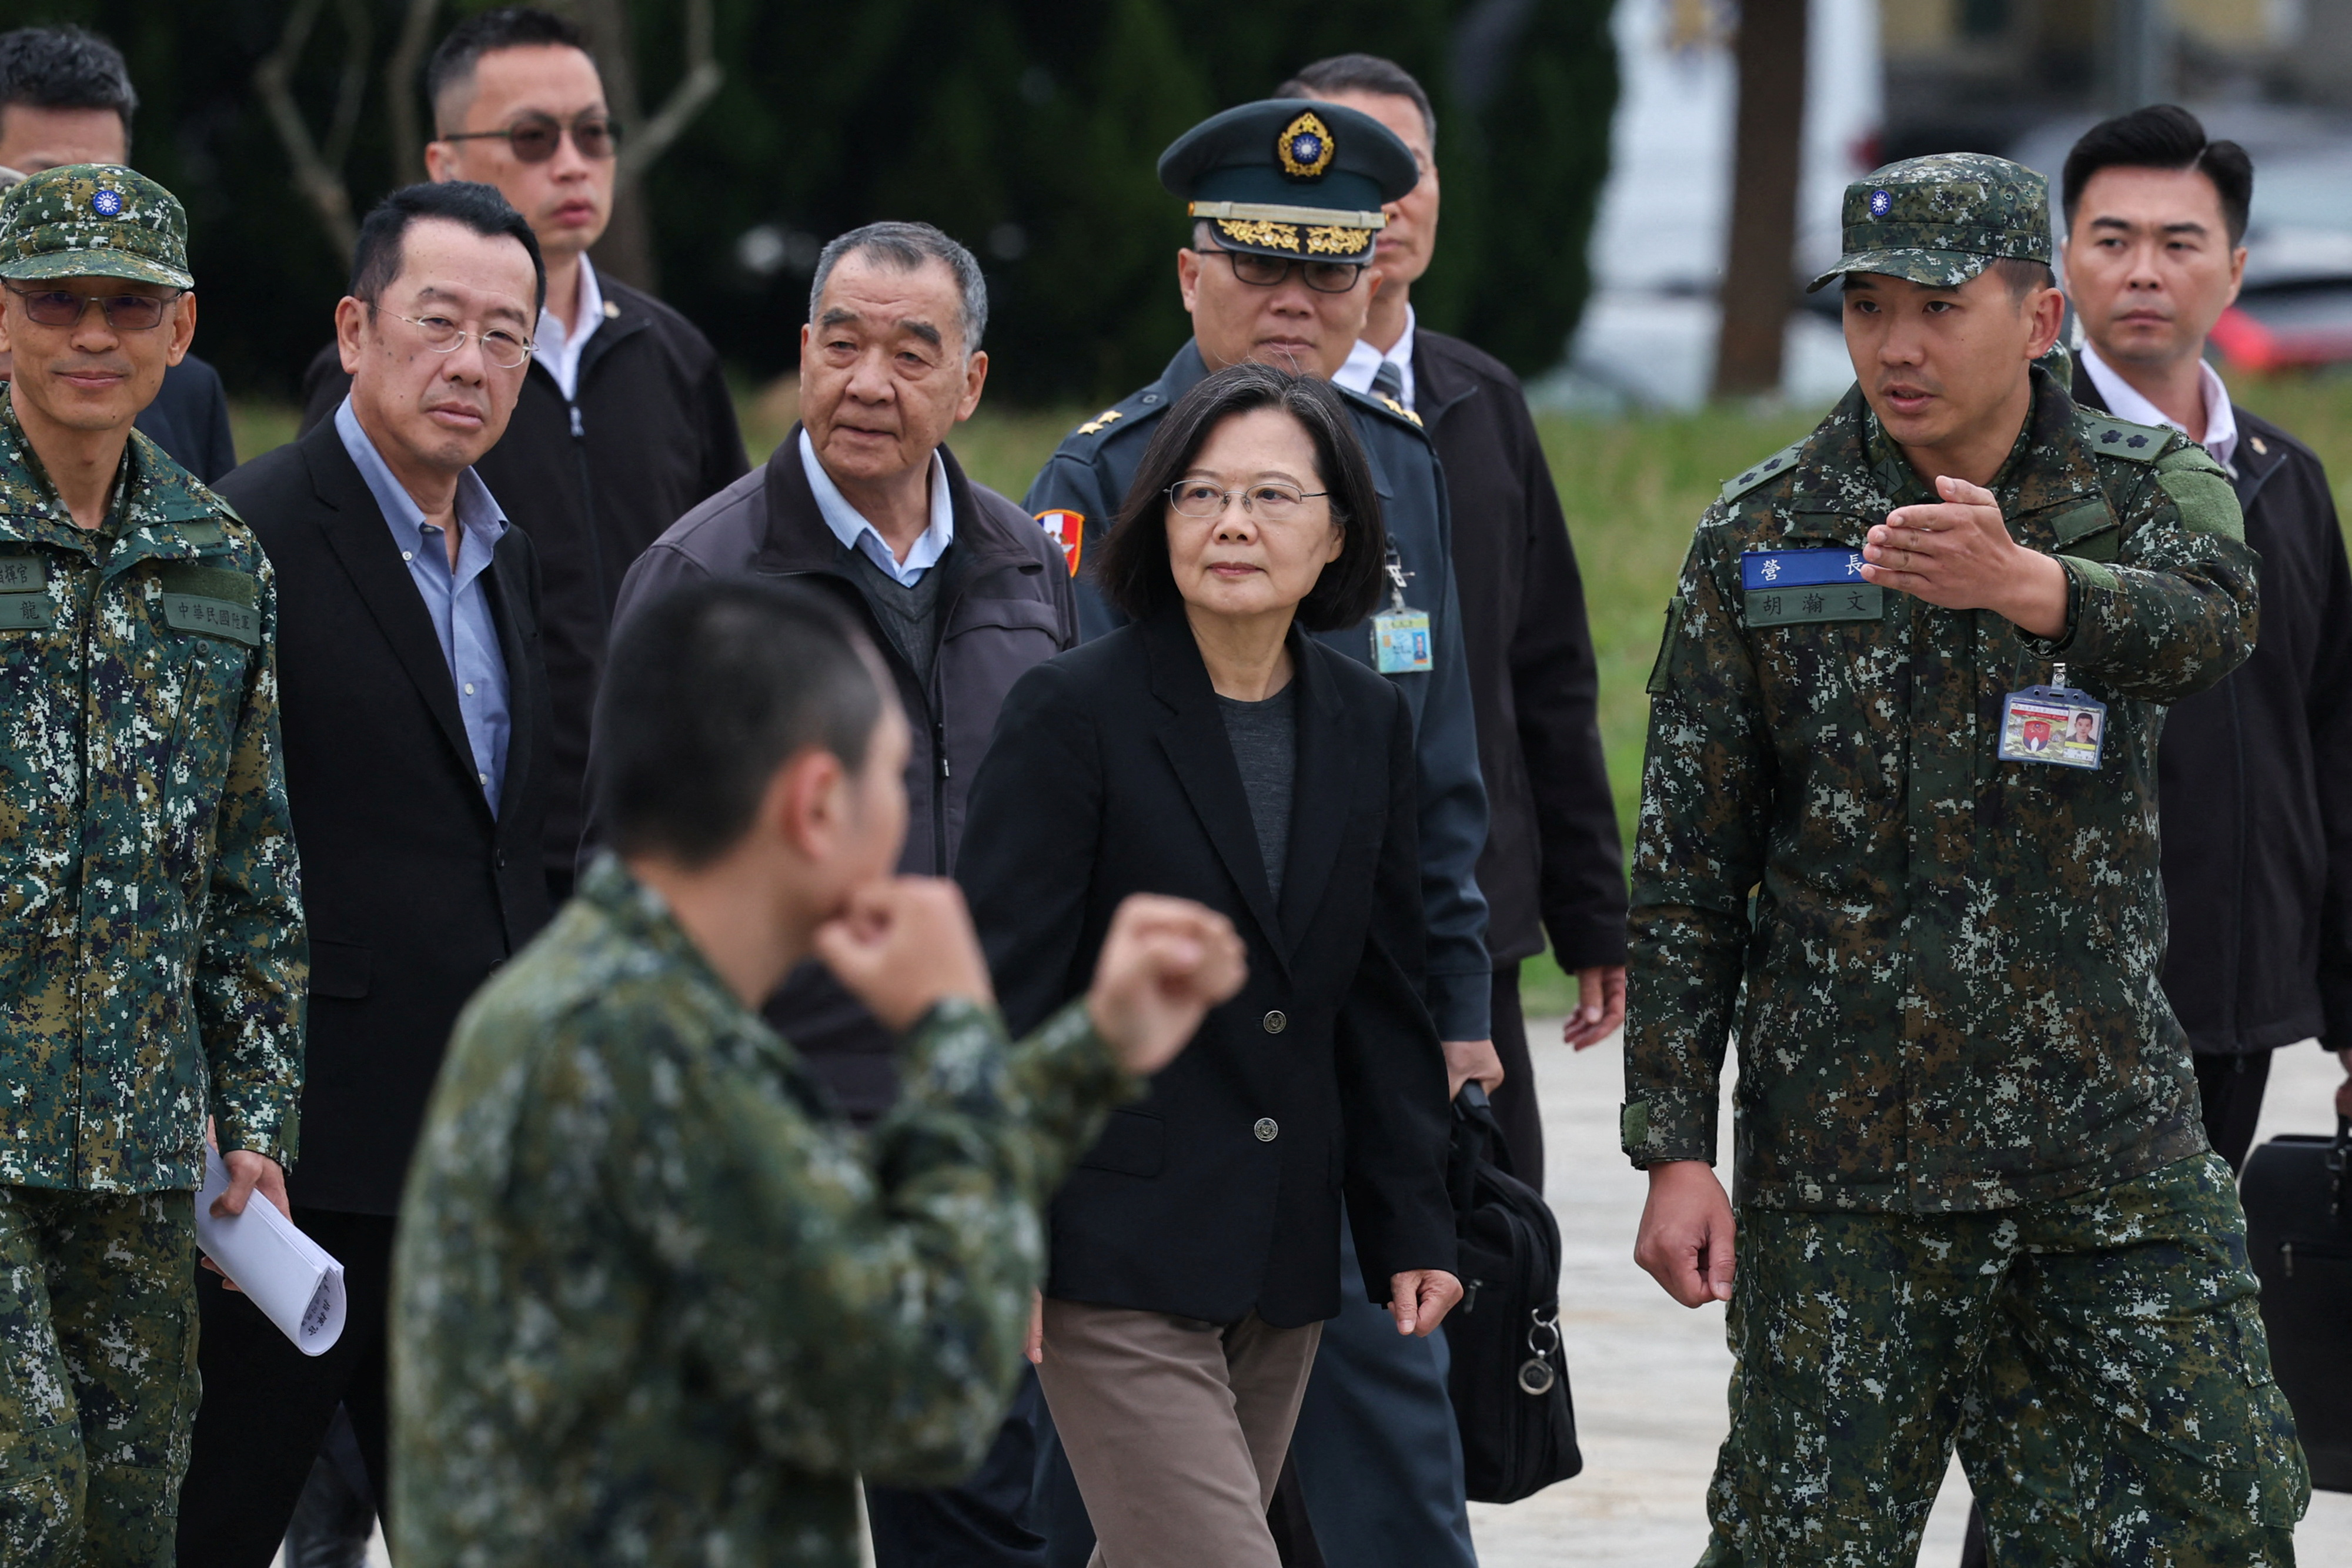 Taiwan President Tsai Ing-wen visits army bases ahead of the Lunar New Year in Hsinchu